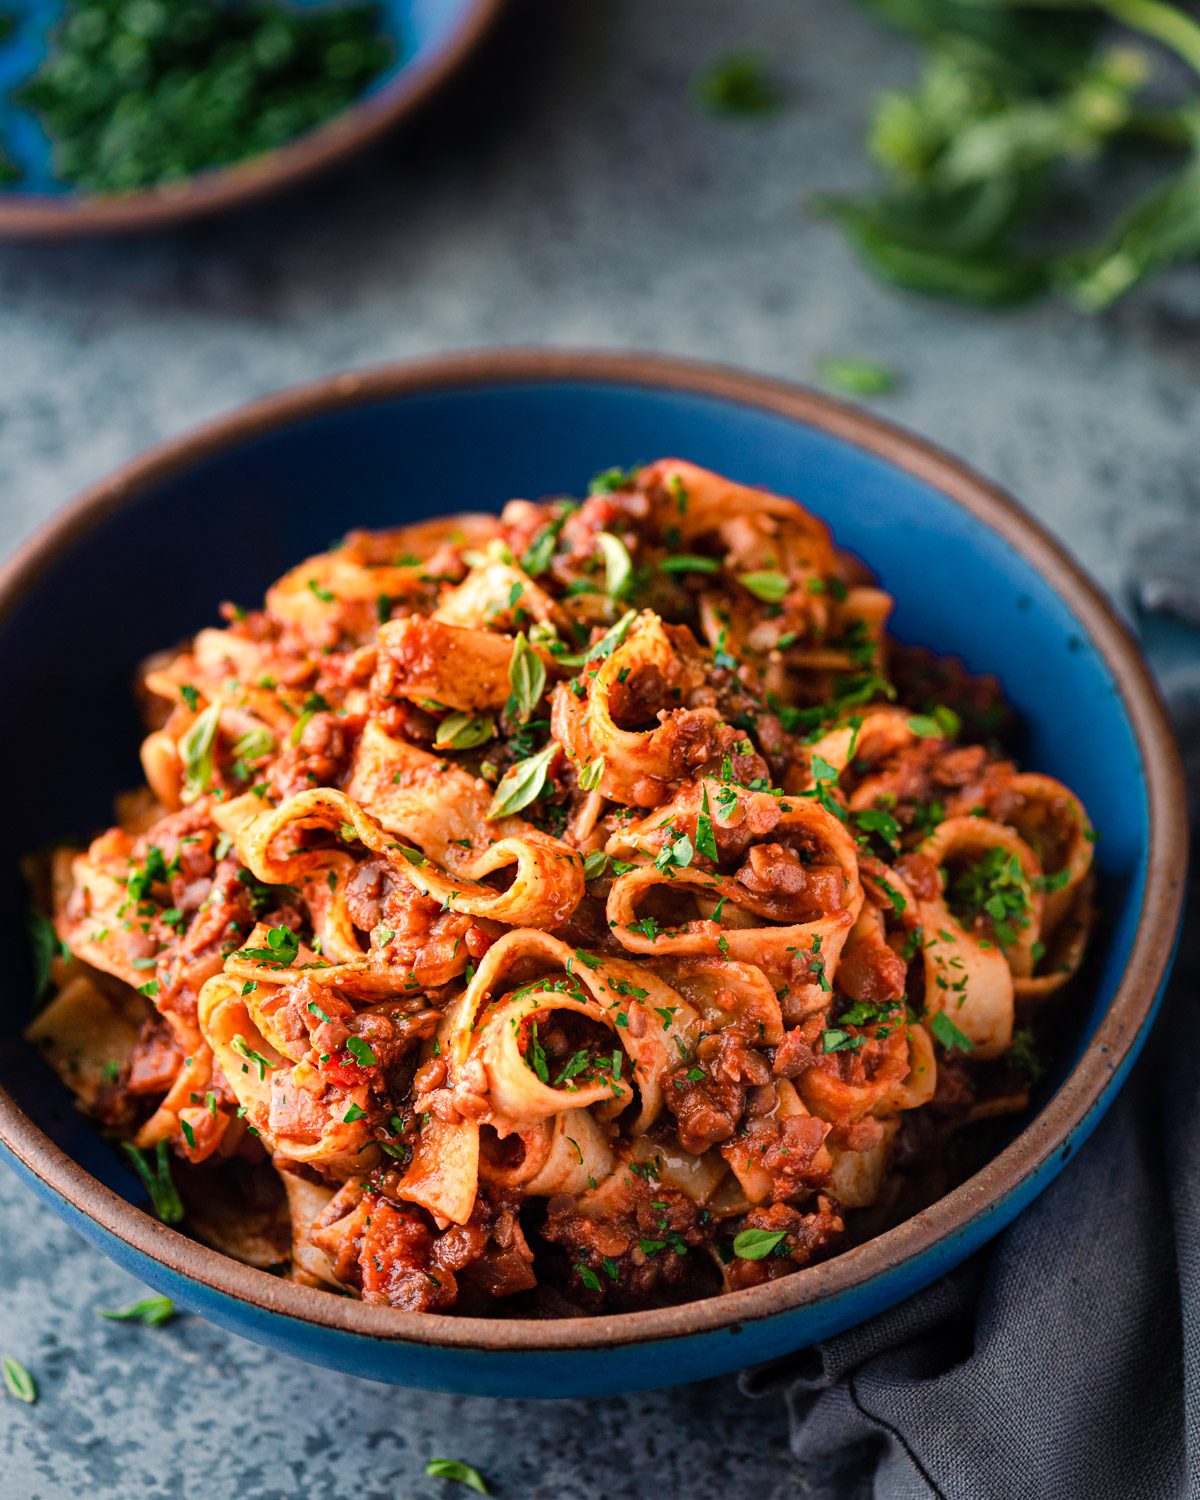 lentil bolognese with wide pasta noodles in a blue bowl on a blue table.